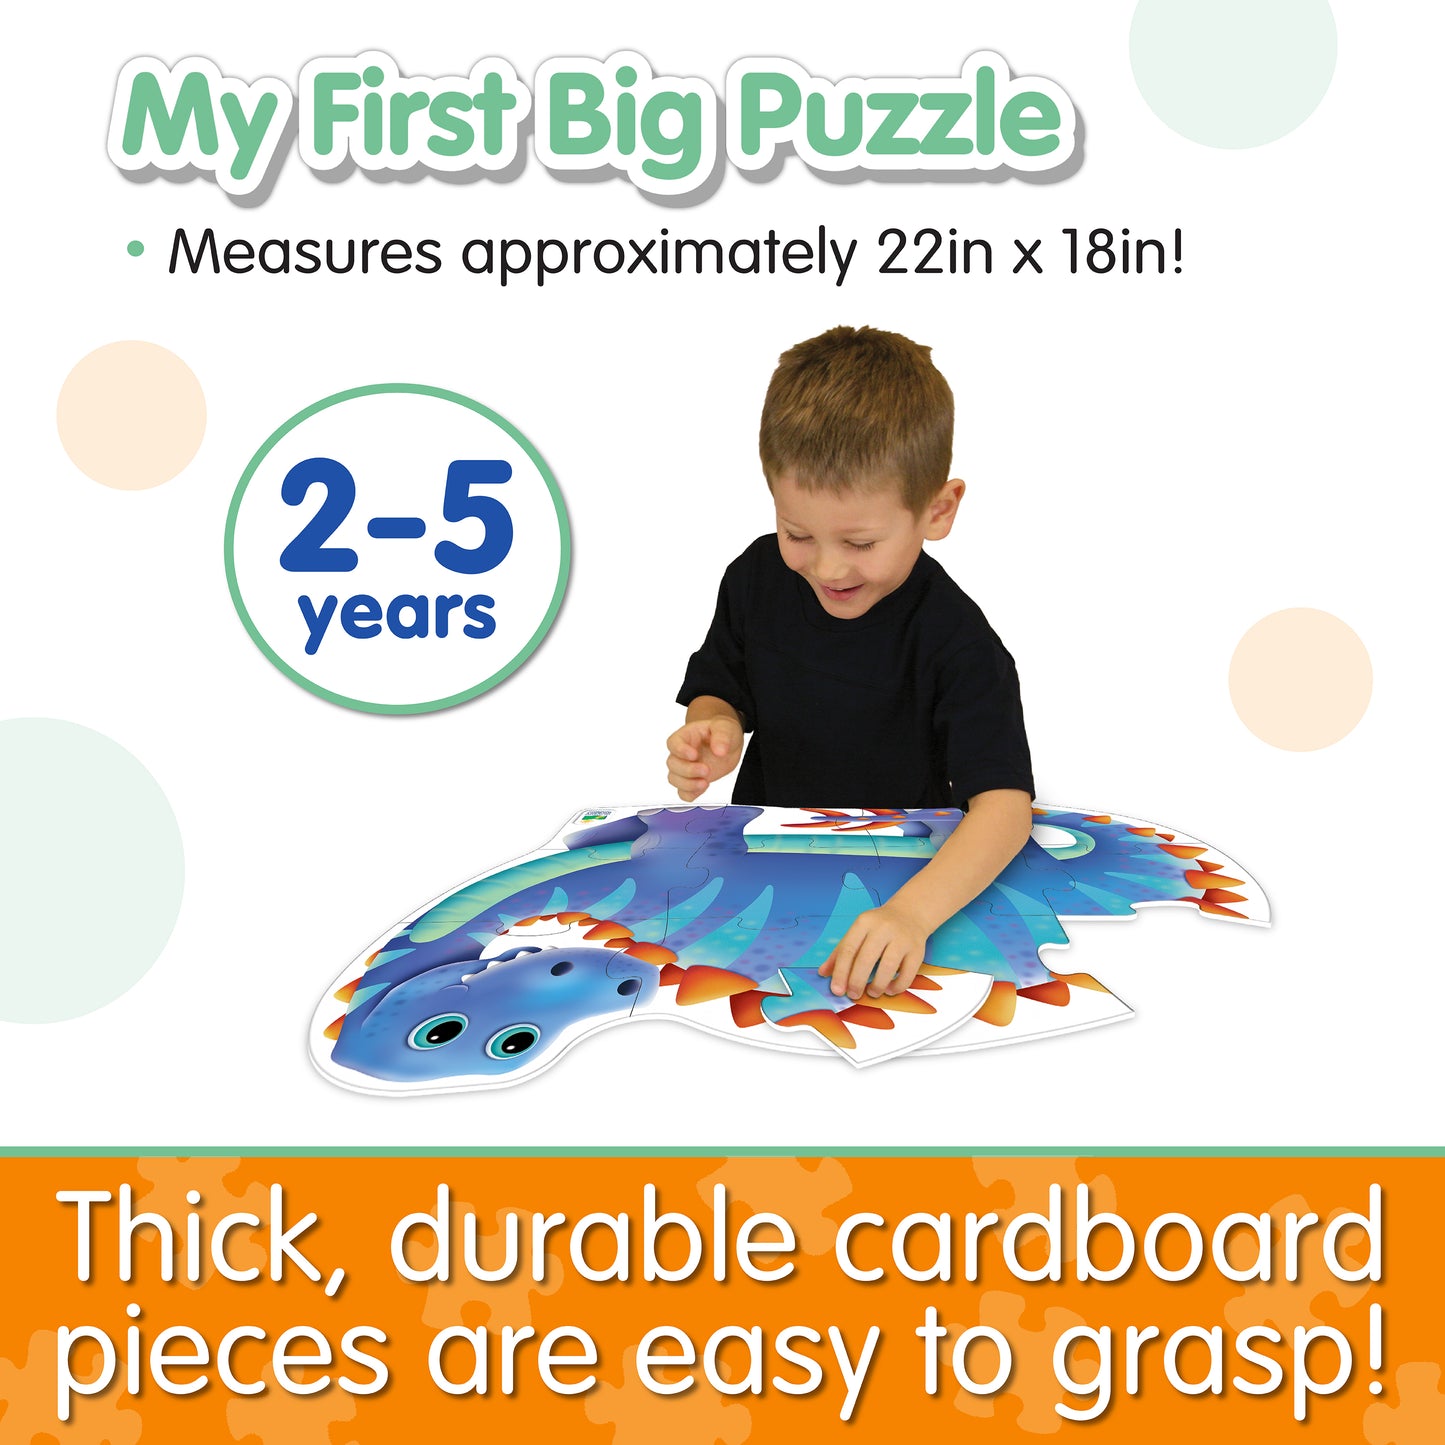 Infographic about My First Big Puzzle - Dinosaur's features that says, "Thick, durable cardboard pieces that are easy to grasp!"